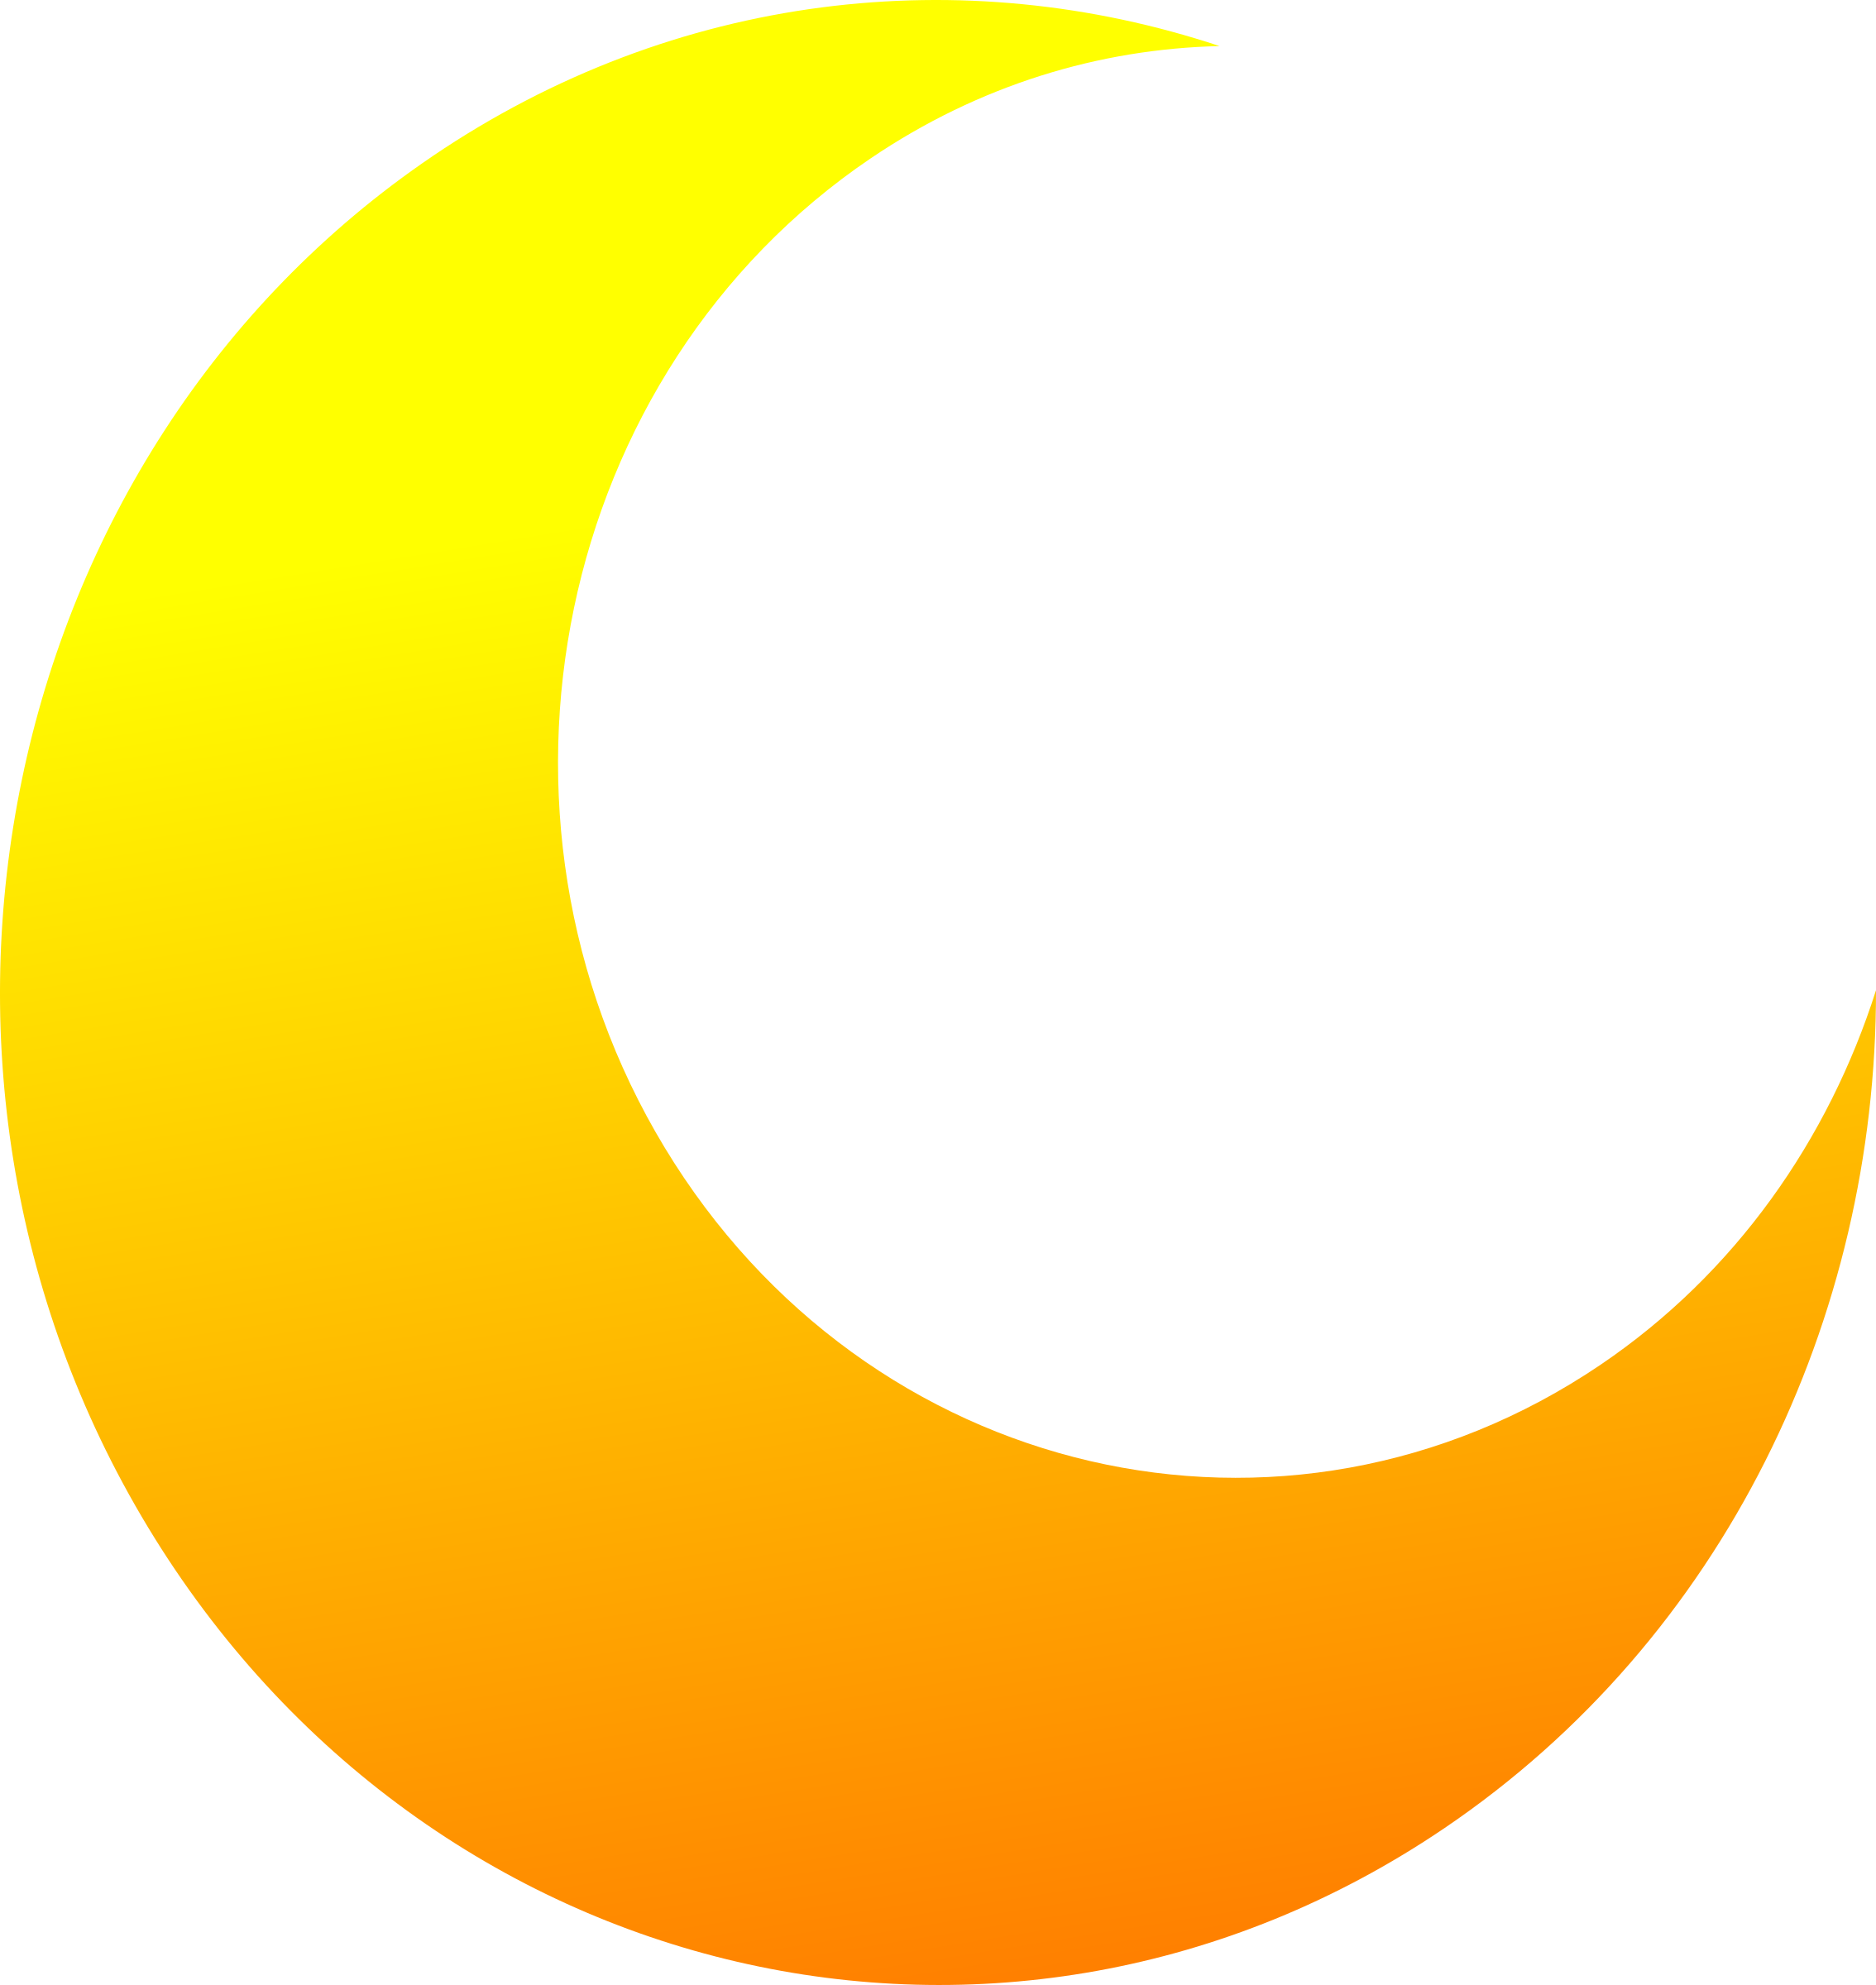 Yellow crescent half moon vector clipart image free png